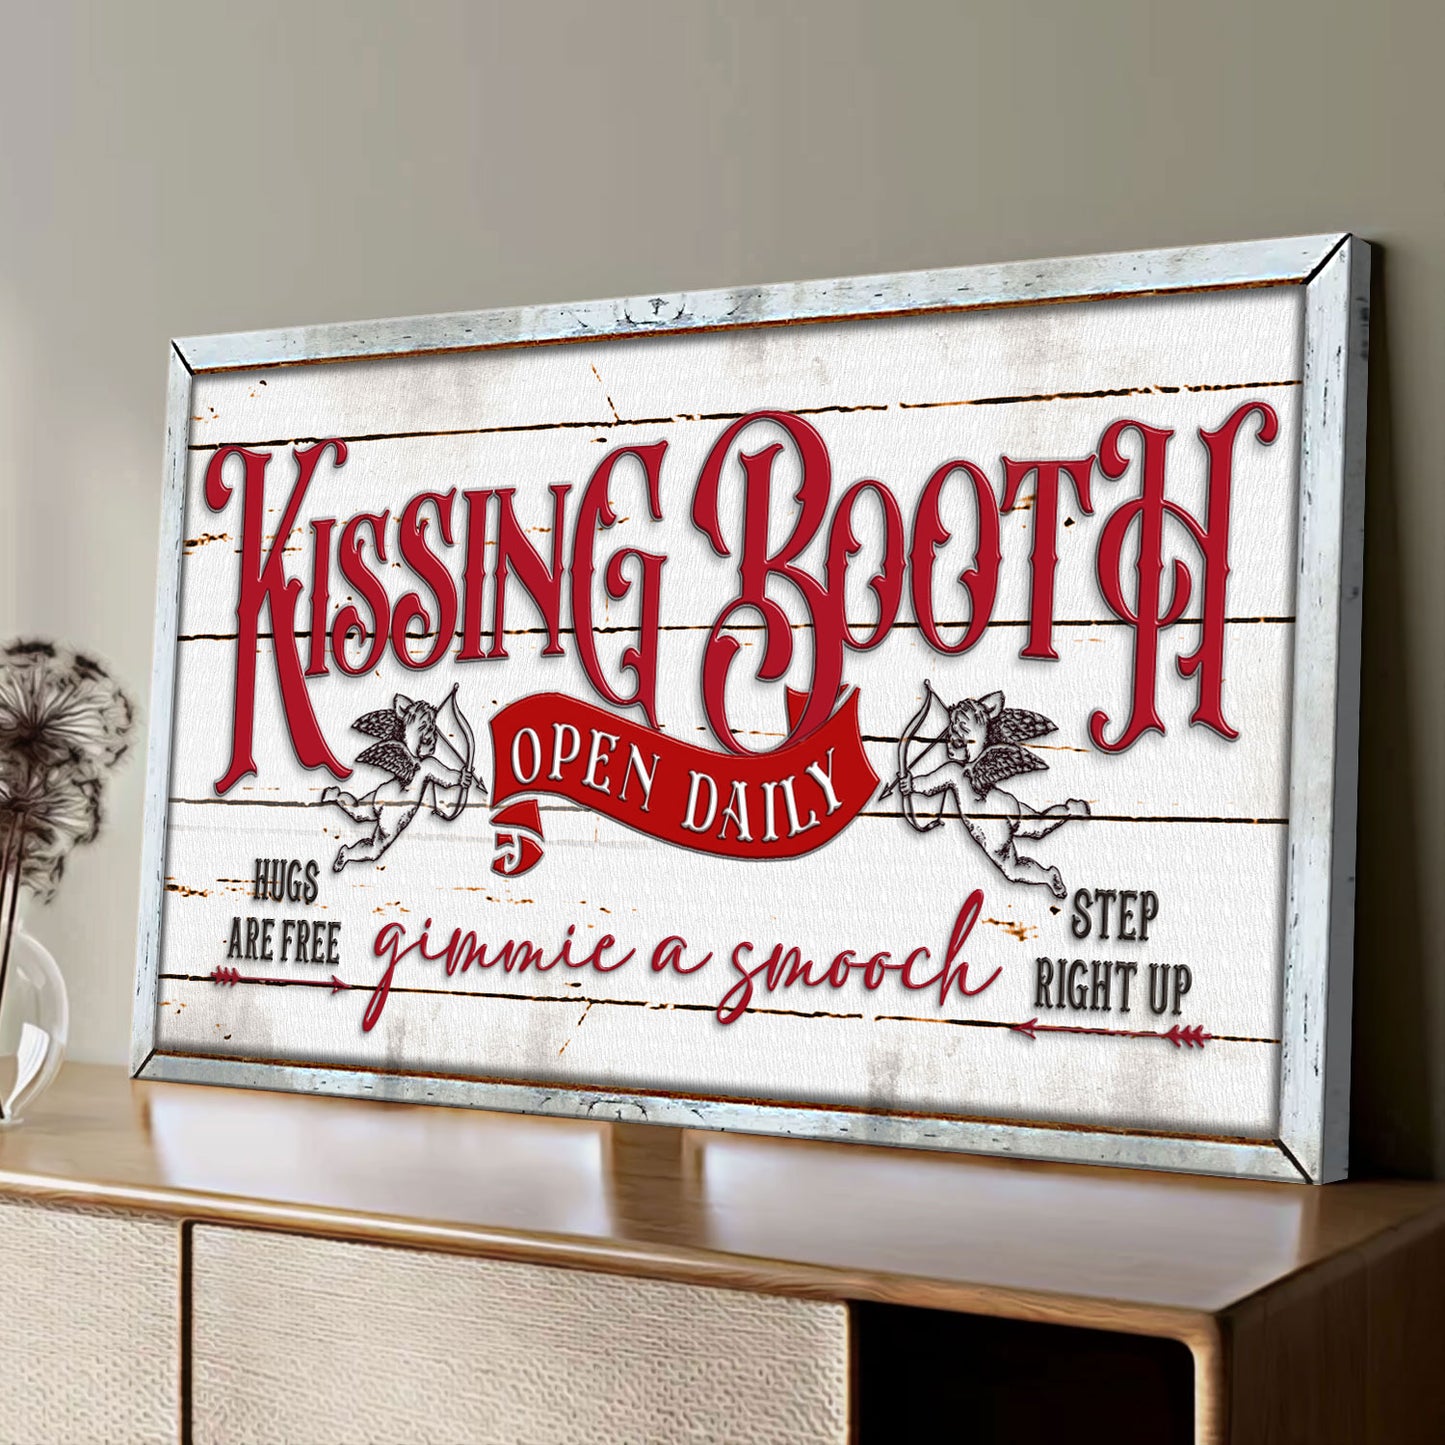 Vintage Rustic Kissing Booth Sign  - Image by Tailored Canvases